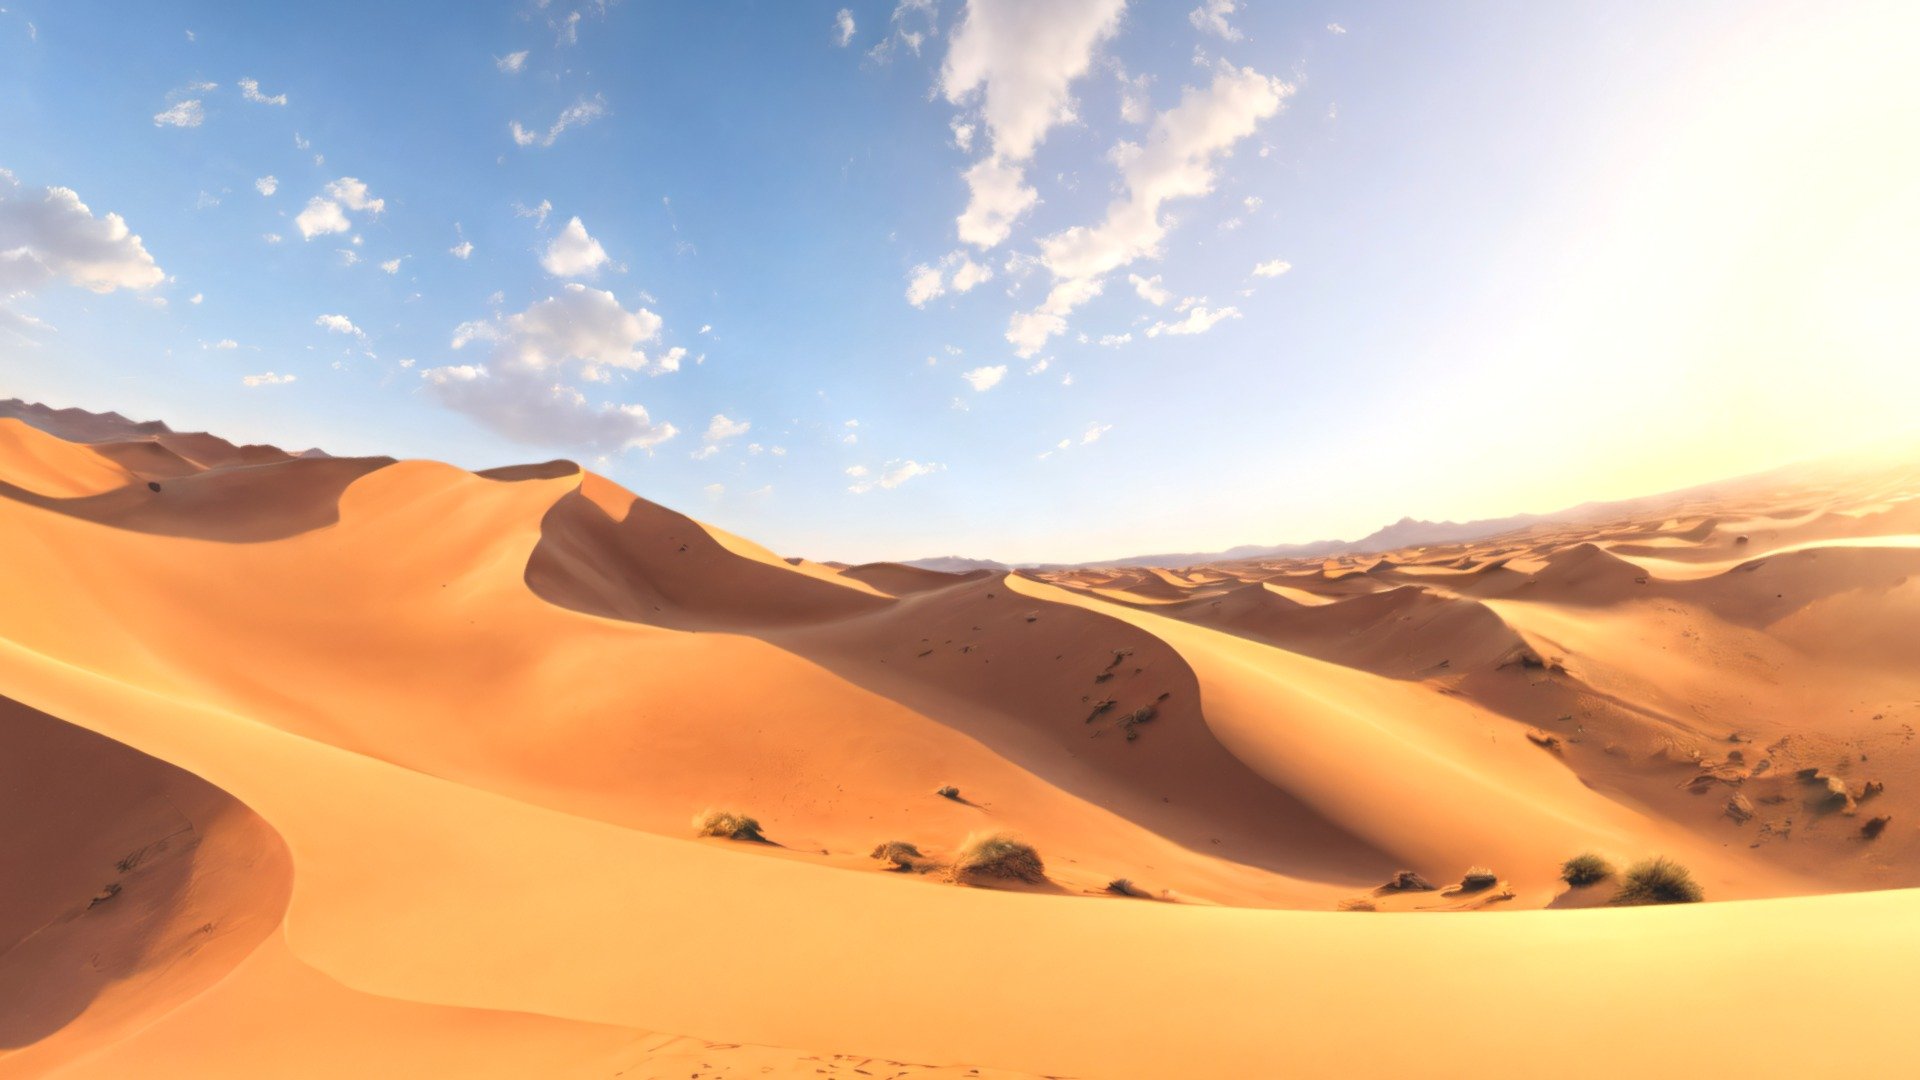 This is an 8k resolution (8192 x 4096) HDRI equirectangular panorama which will help you create 360 degrees Desert Dunes background in different 3d software (Blender, Unreal Engine, Unity, 3dMax and many others). It is perfect for games, virtual reality, 3d renders, movies etc. The image was created with AI and edited in different 2d and 3d software to improve quality, remove seams and make it perfect for any 3d or 2d  Desert project.

The image comes in 2 formats: .hdr and .jpg - HDRI Desert Panorama A - Buy Royalty Free 3D model by Ionut81 3d model